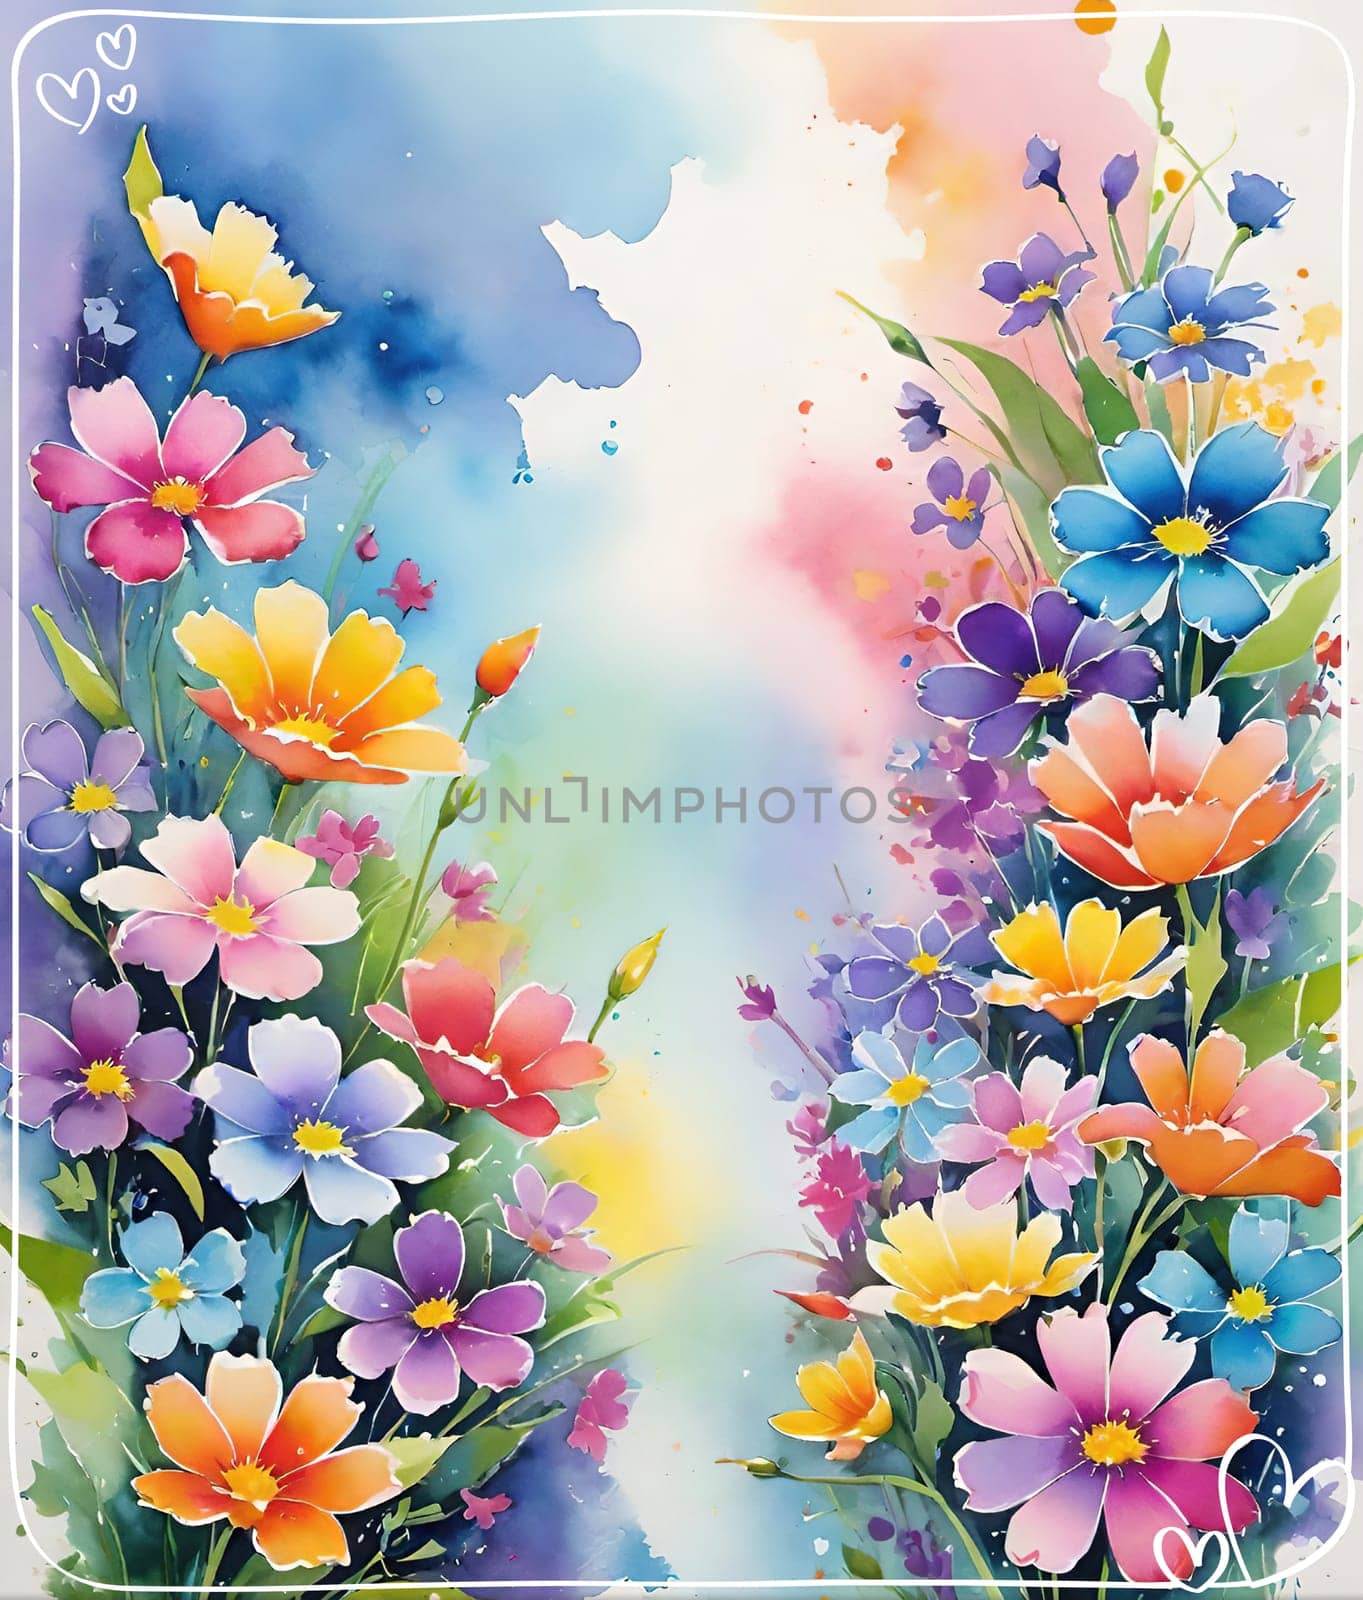 Spring background with colorful flowers and place for text. Vector illustration.Abstract floral background with colorful flowers. Beautiful floral background with colorful flowers and place for your text.Beautiful summer landscape with flowers. Vector illustration for your design. Watercolor illustration.Greeting card.Floral background.